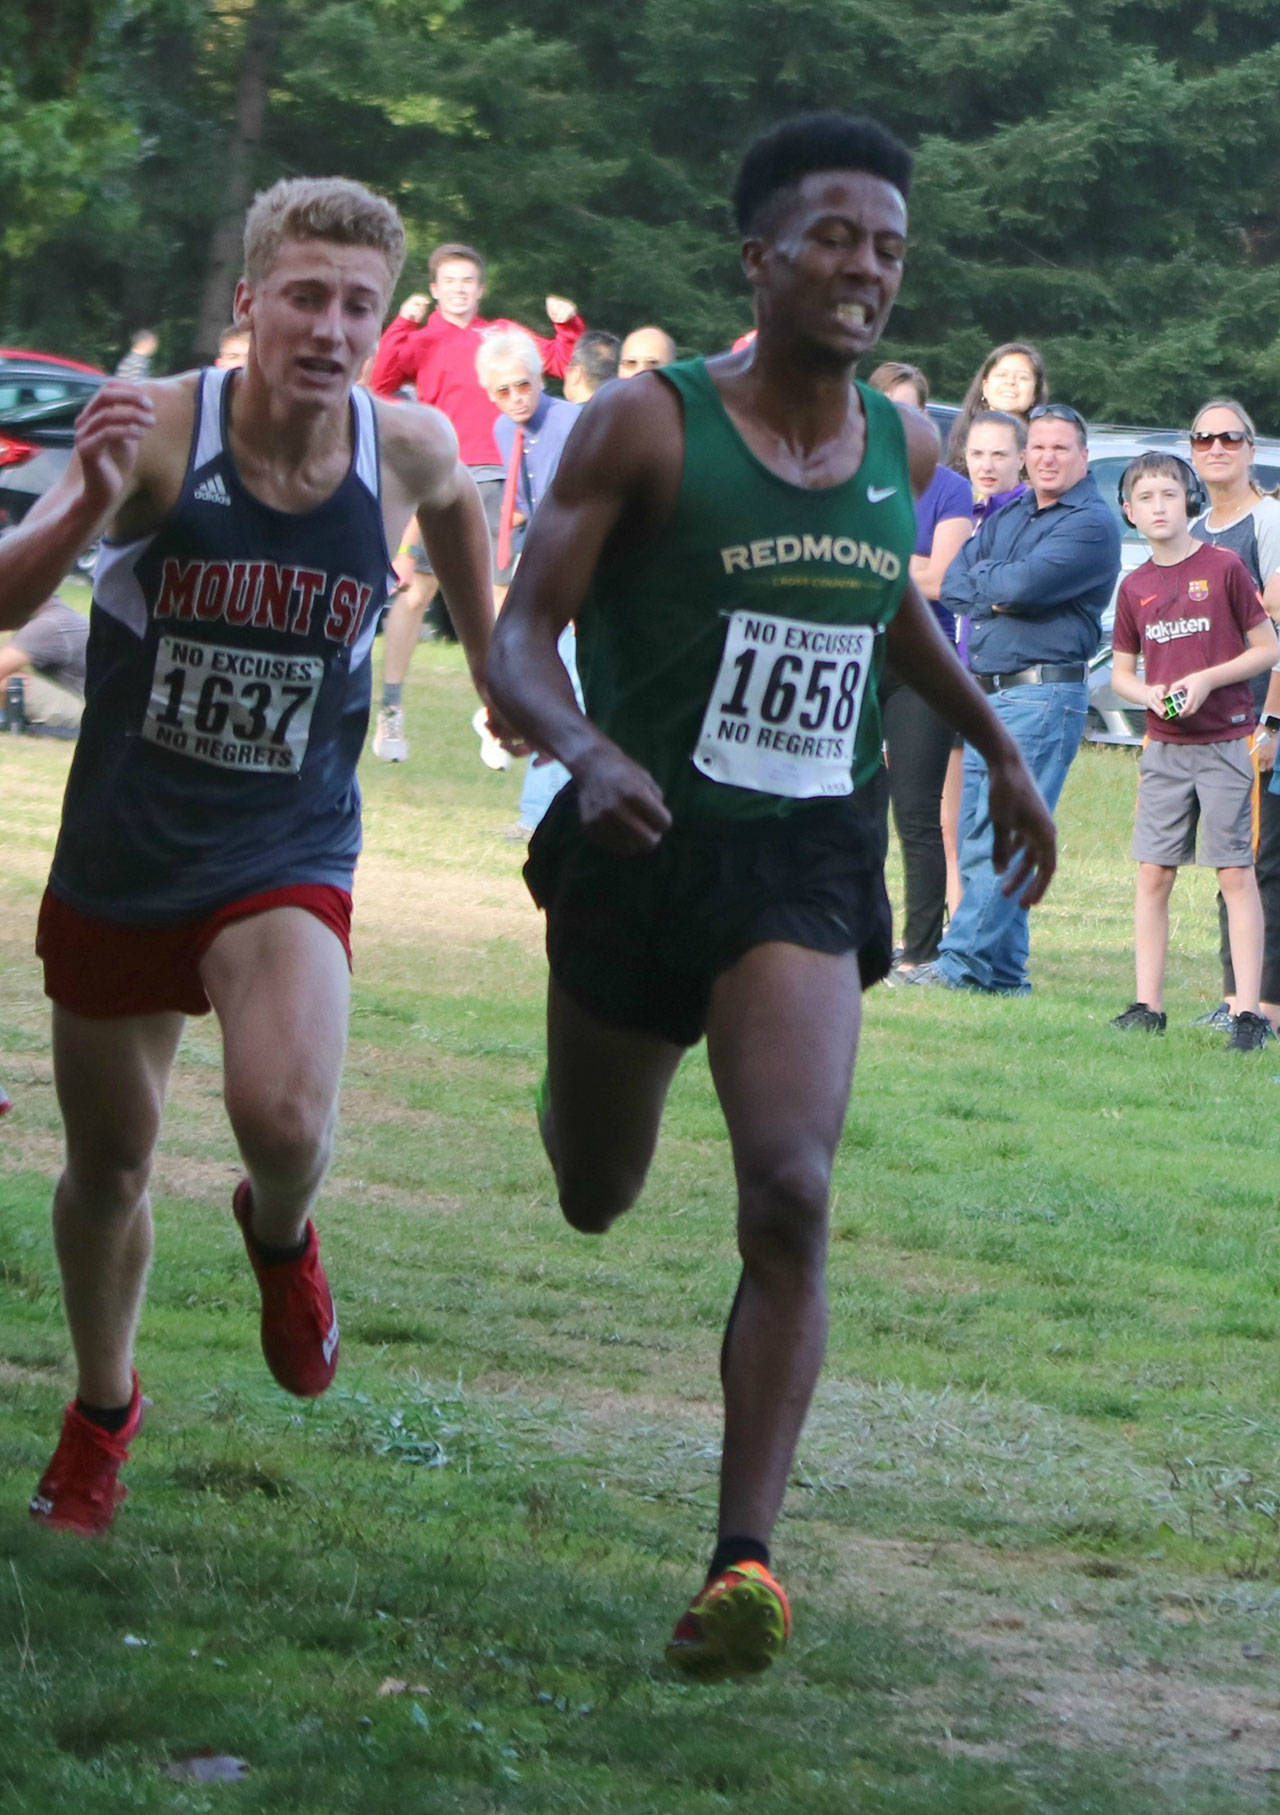 Mount Si’s Paul Talens, left, finishes second to Redmond’s Dereje Himbago in the junior boys two-mile race at the KingCo Jamboree on Sept. 11 at Lake Sammamish State Park. Andy Nystrom/ staff photo